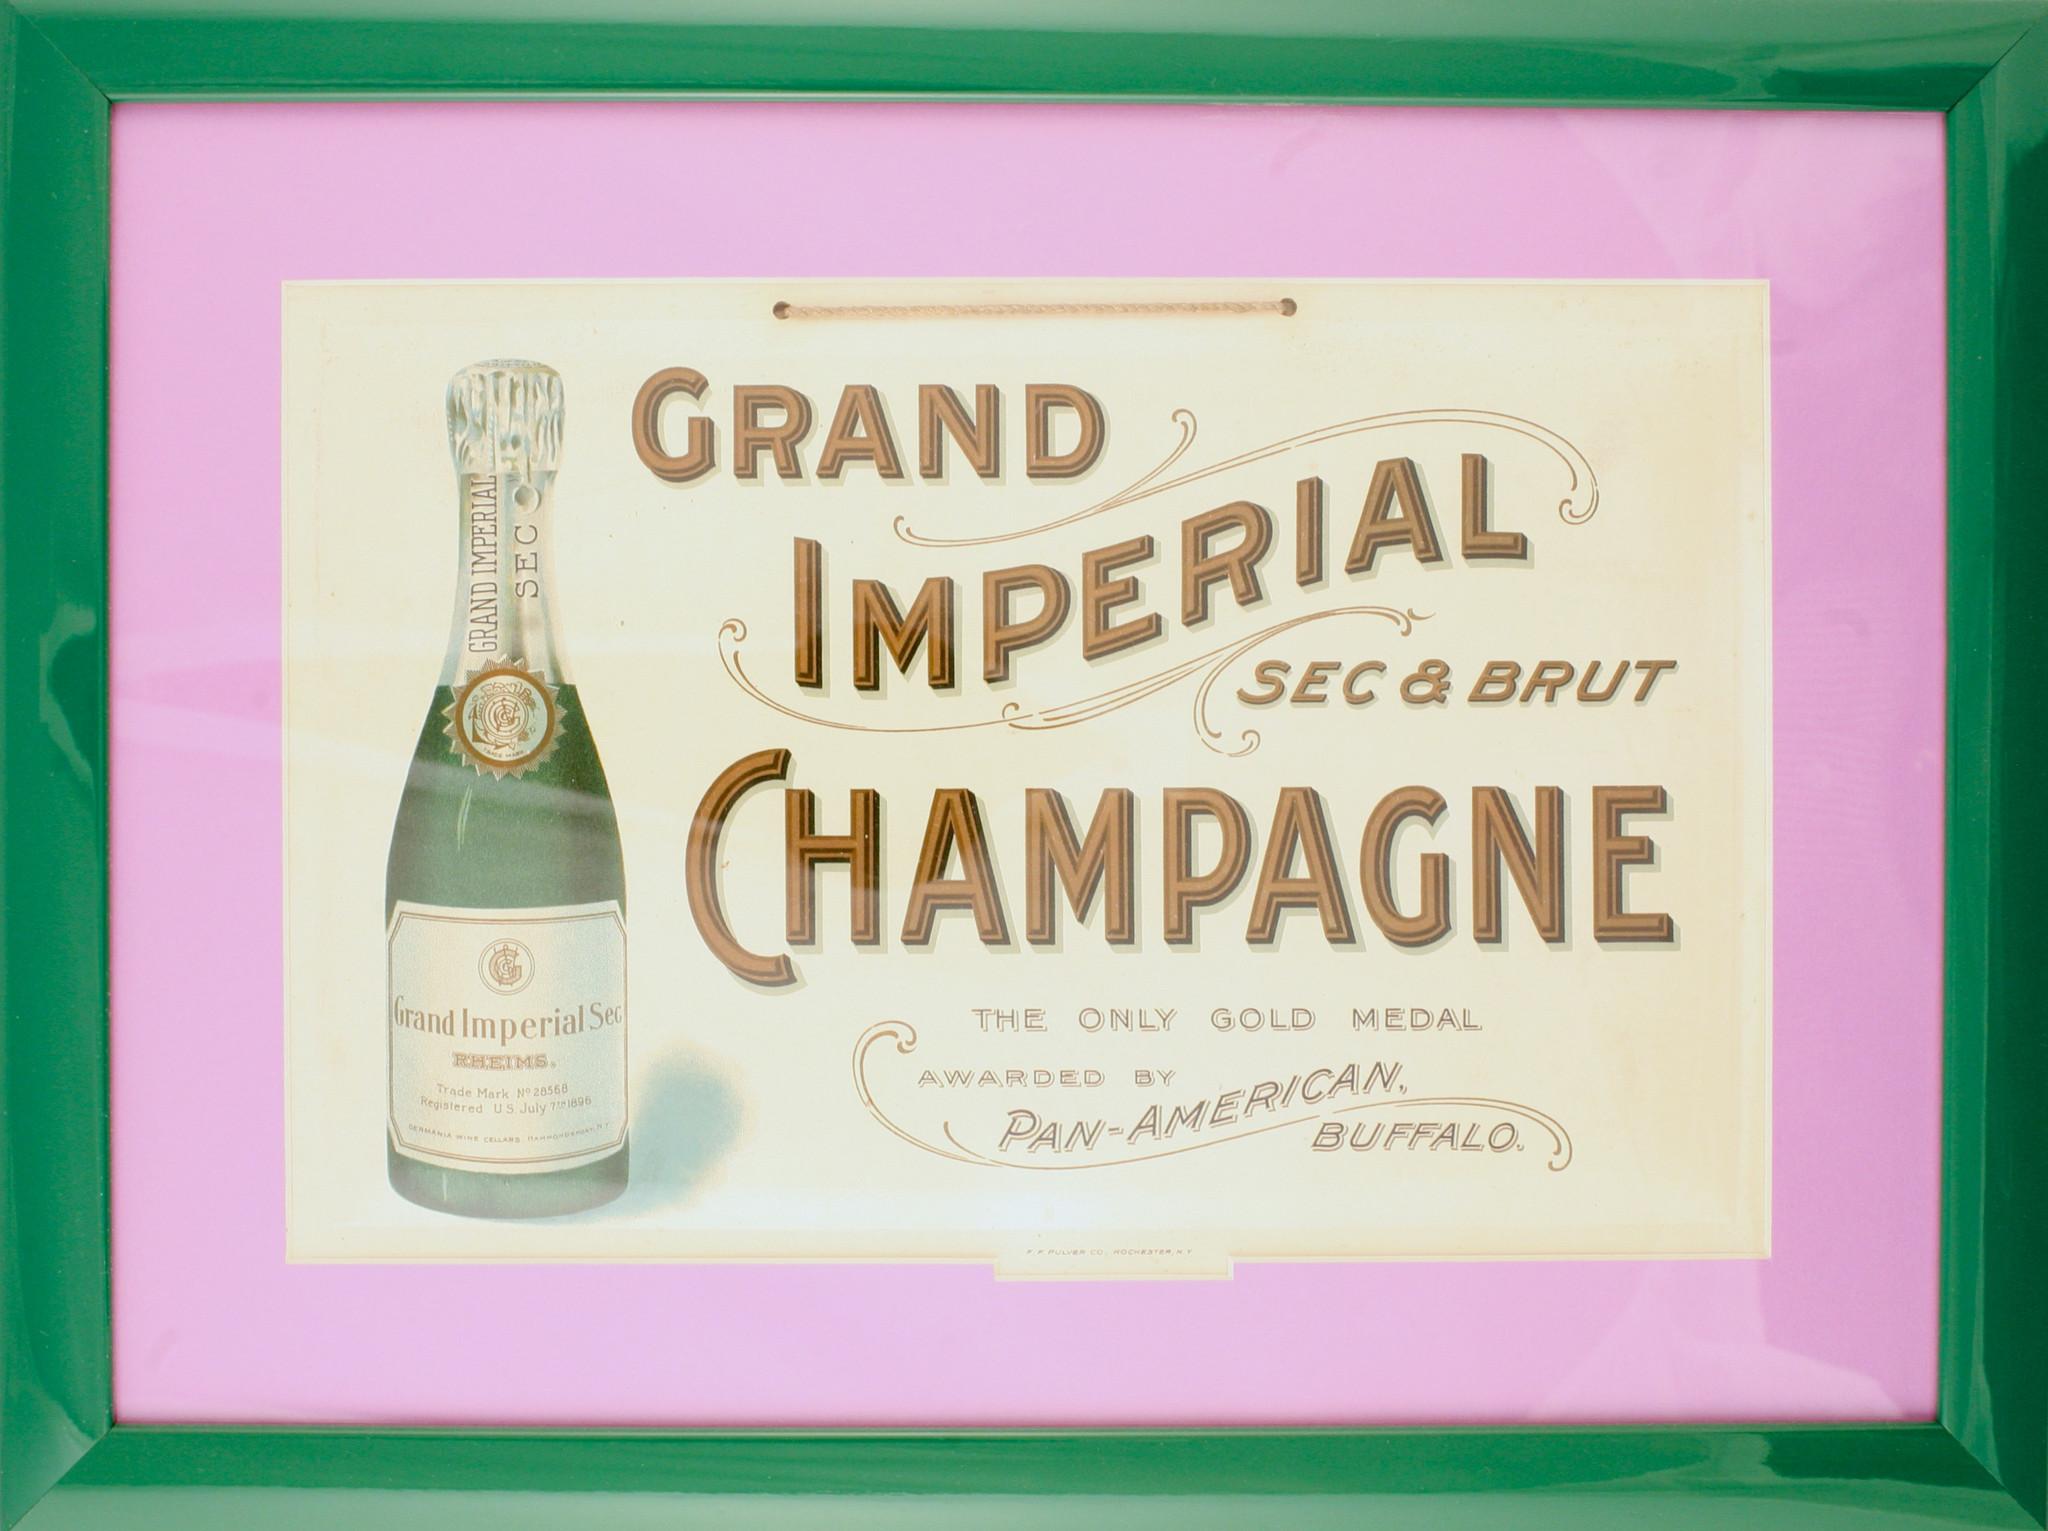 "Grand Imperial Champagne" 1910 Advert Signage - Print by Unknown